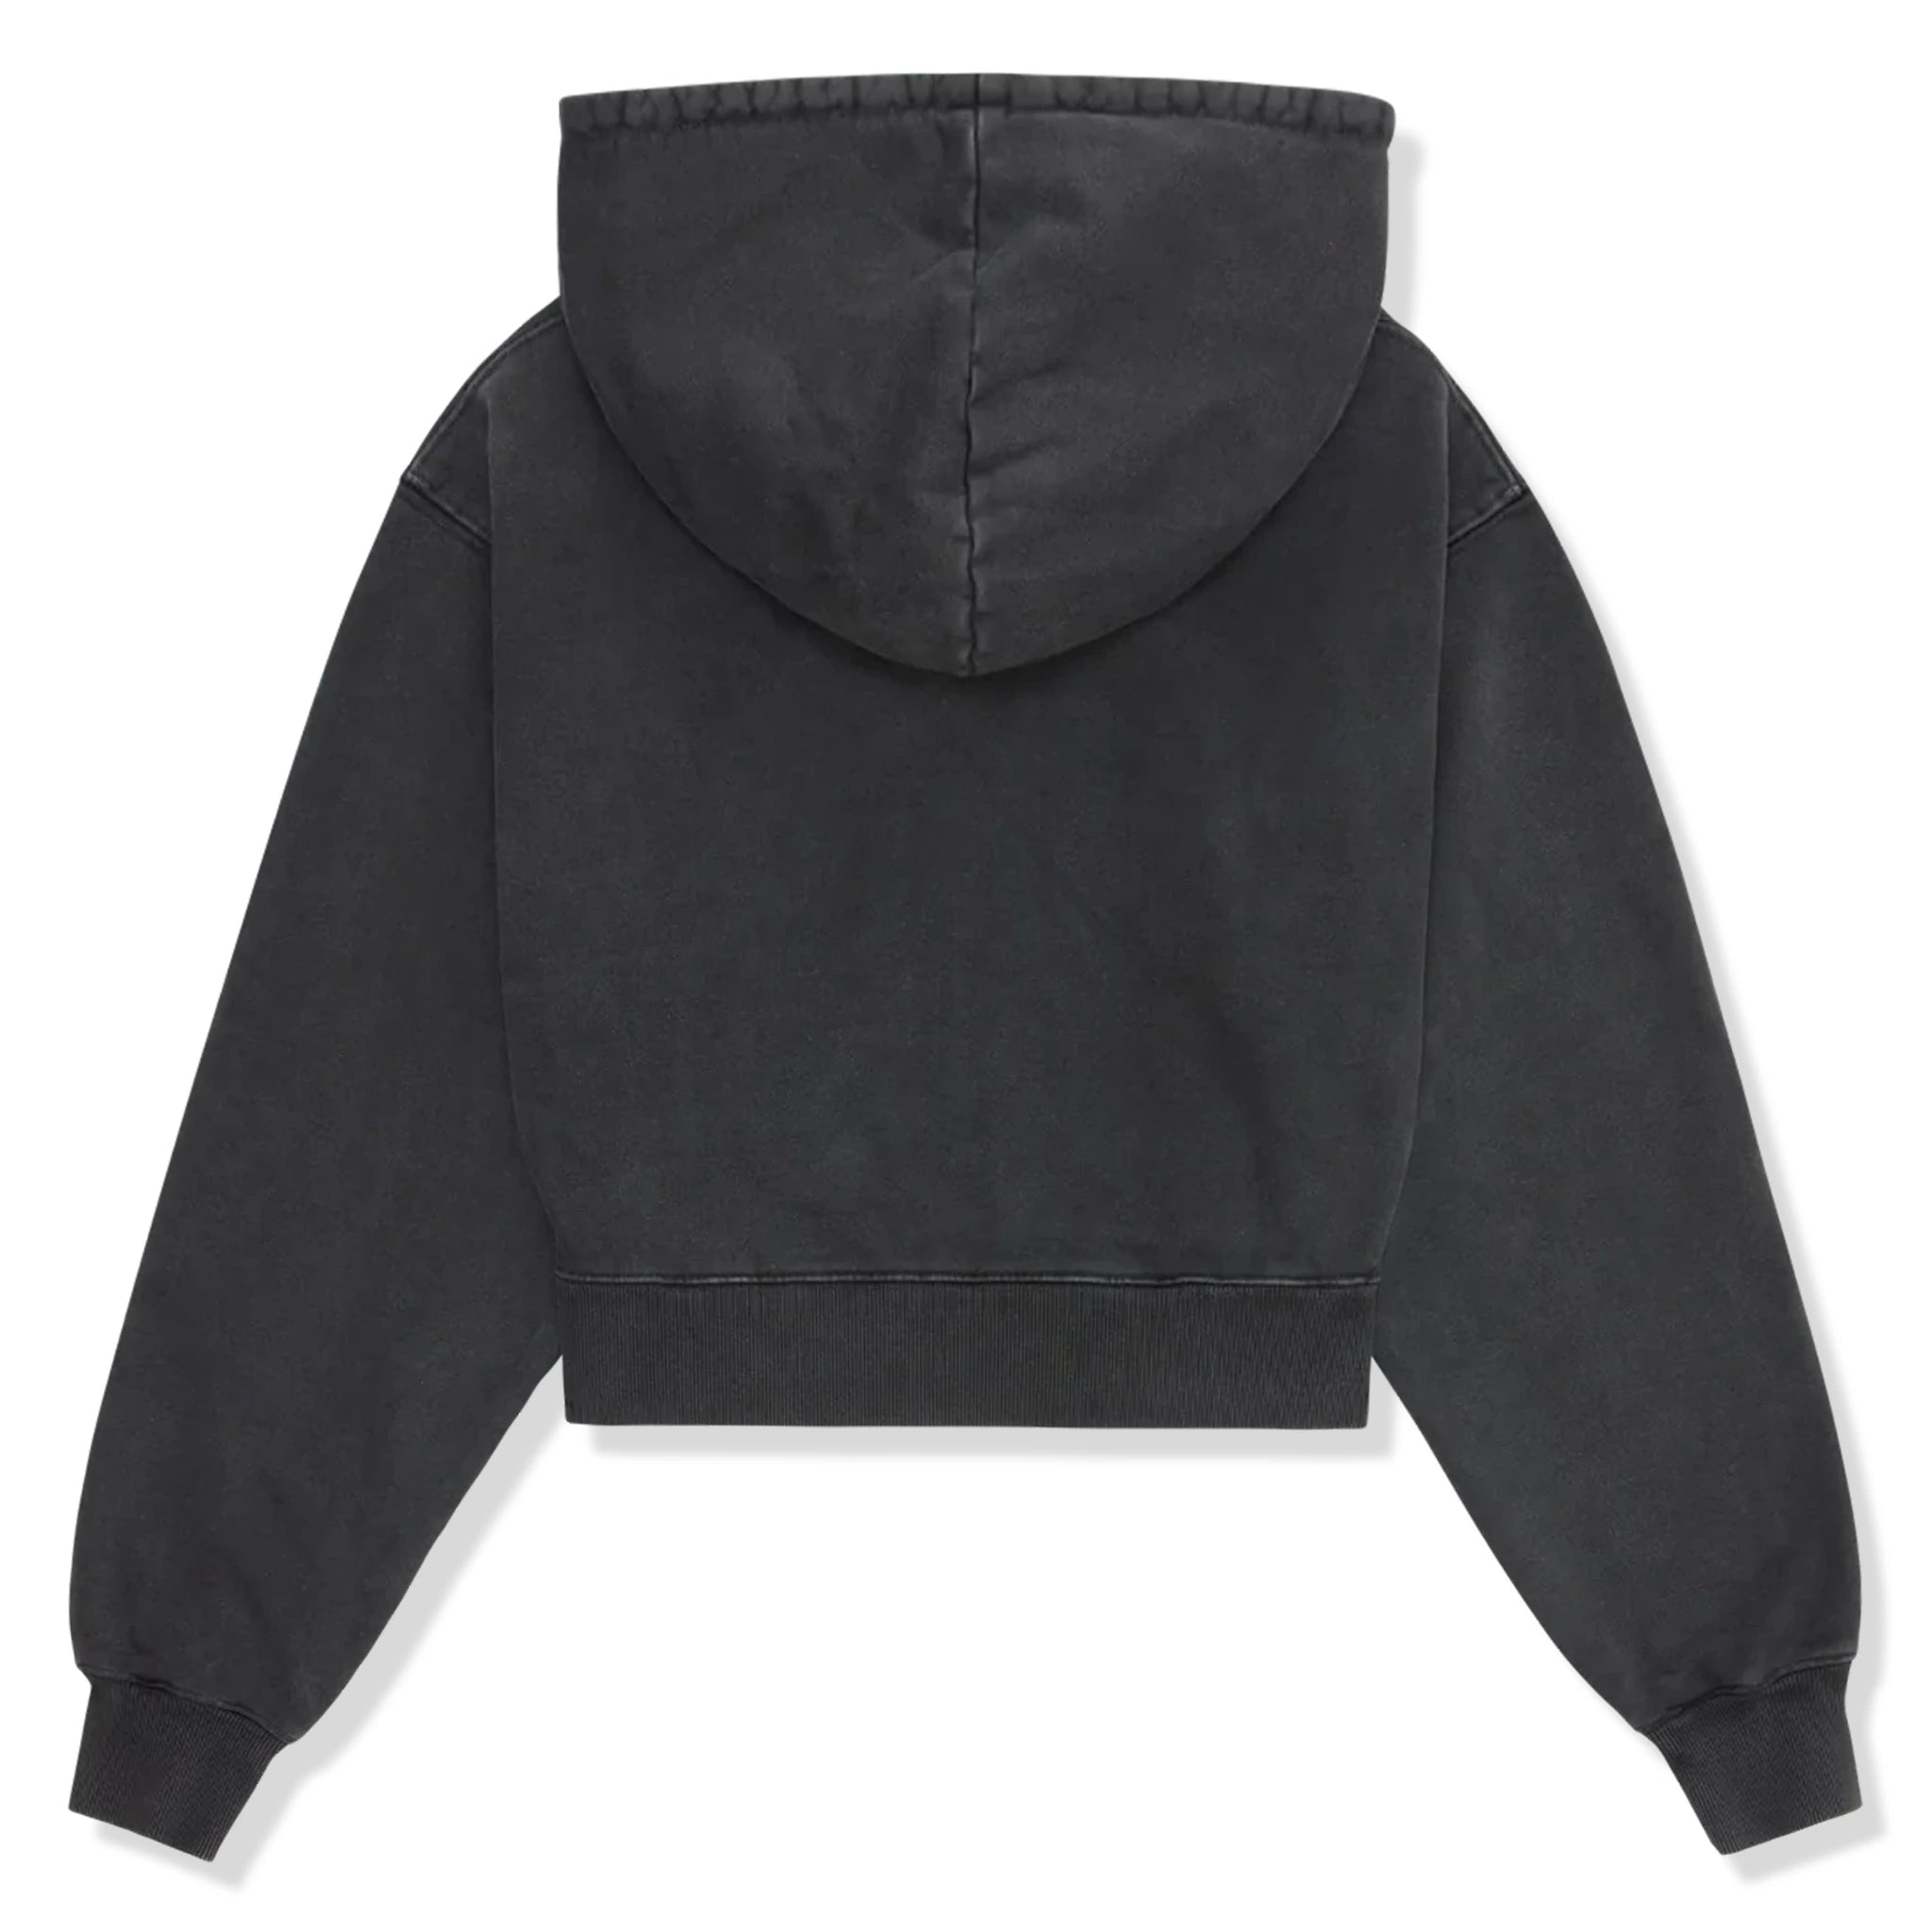 Back view of Broken Planet Basics Washed Soot Black Cropped Zip-Up Hoodie